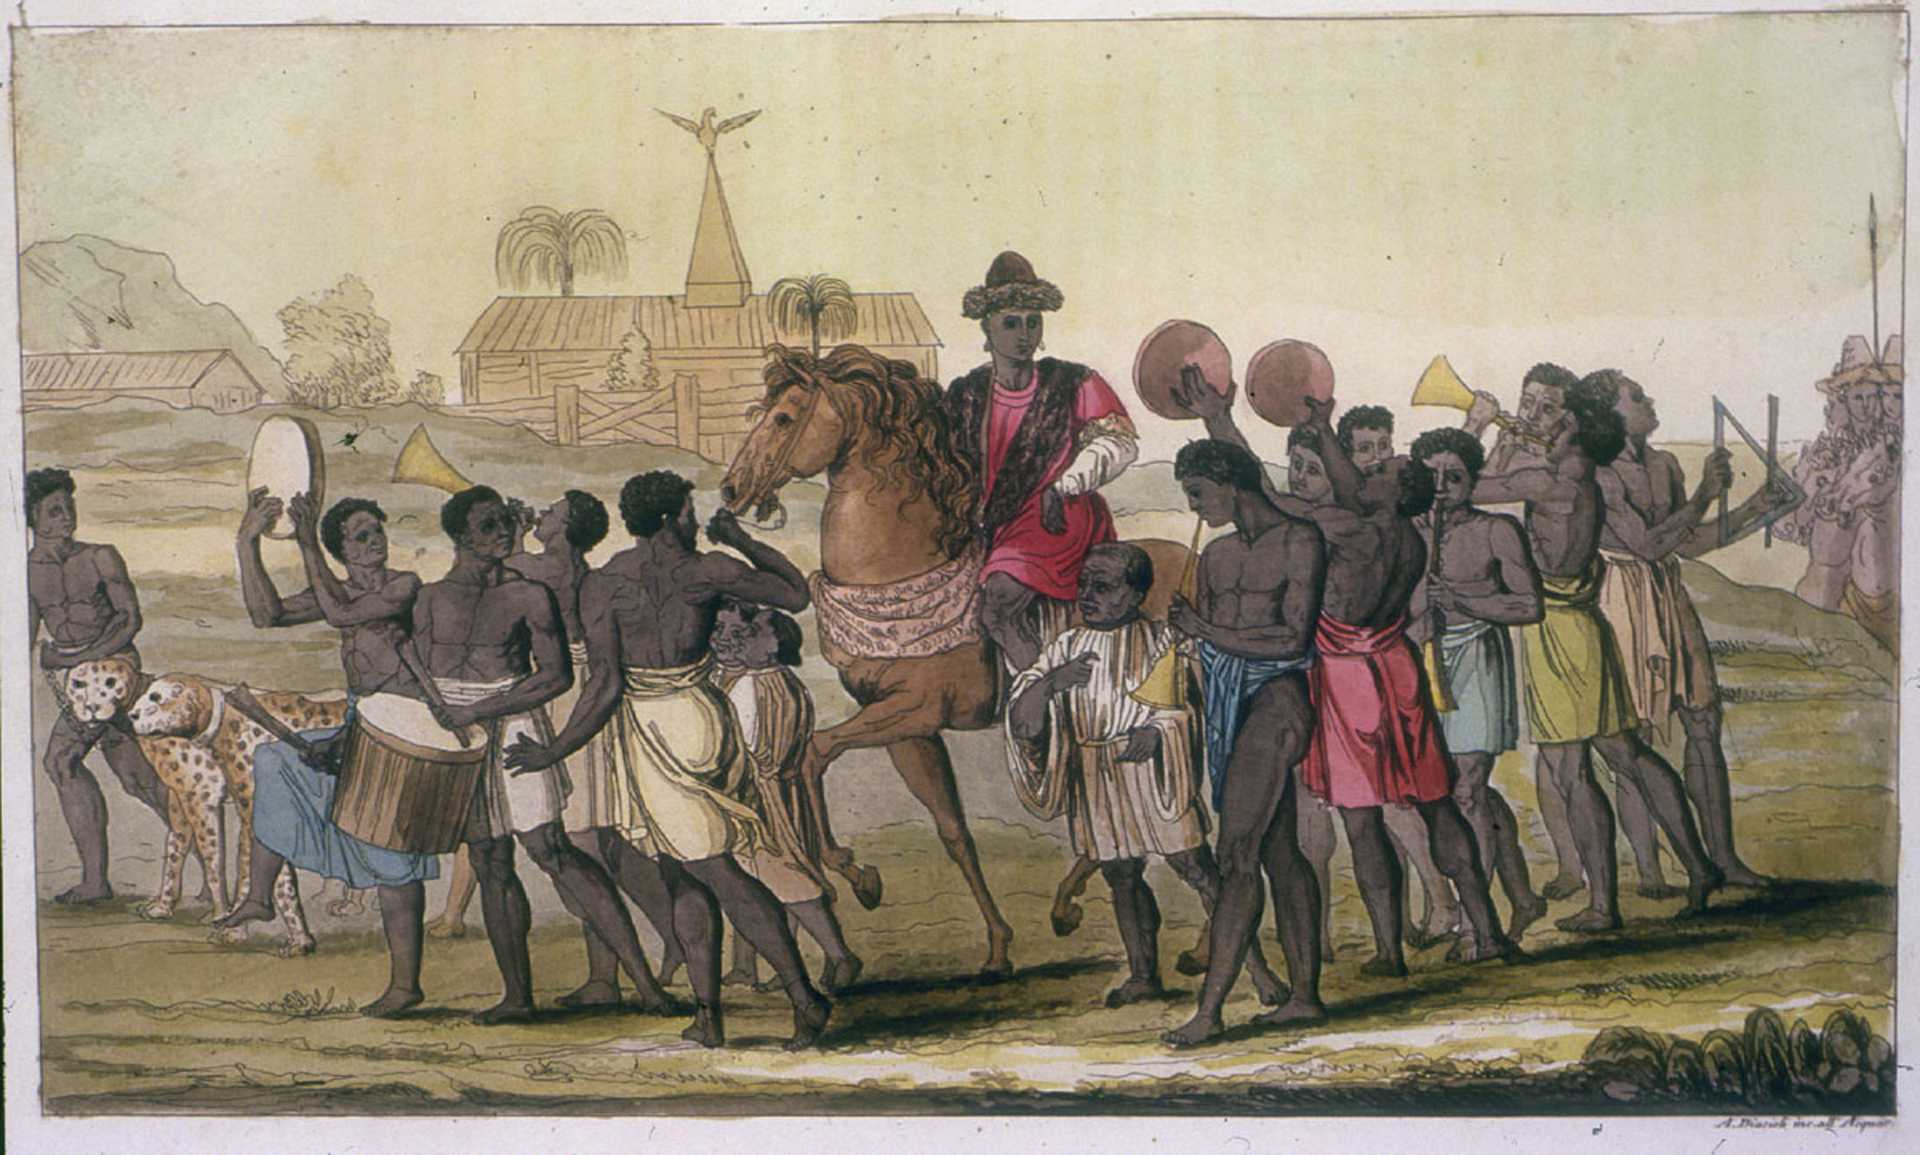 Painting of the King of Benin on horseback with other people crowded around him.